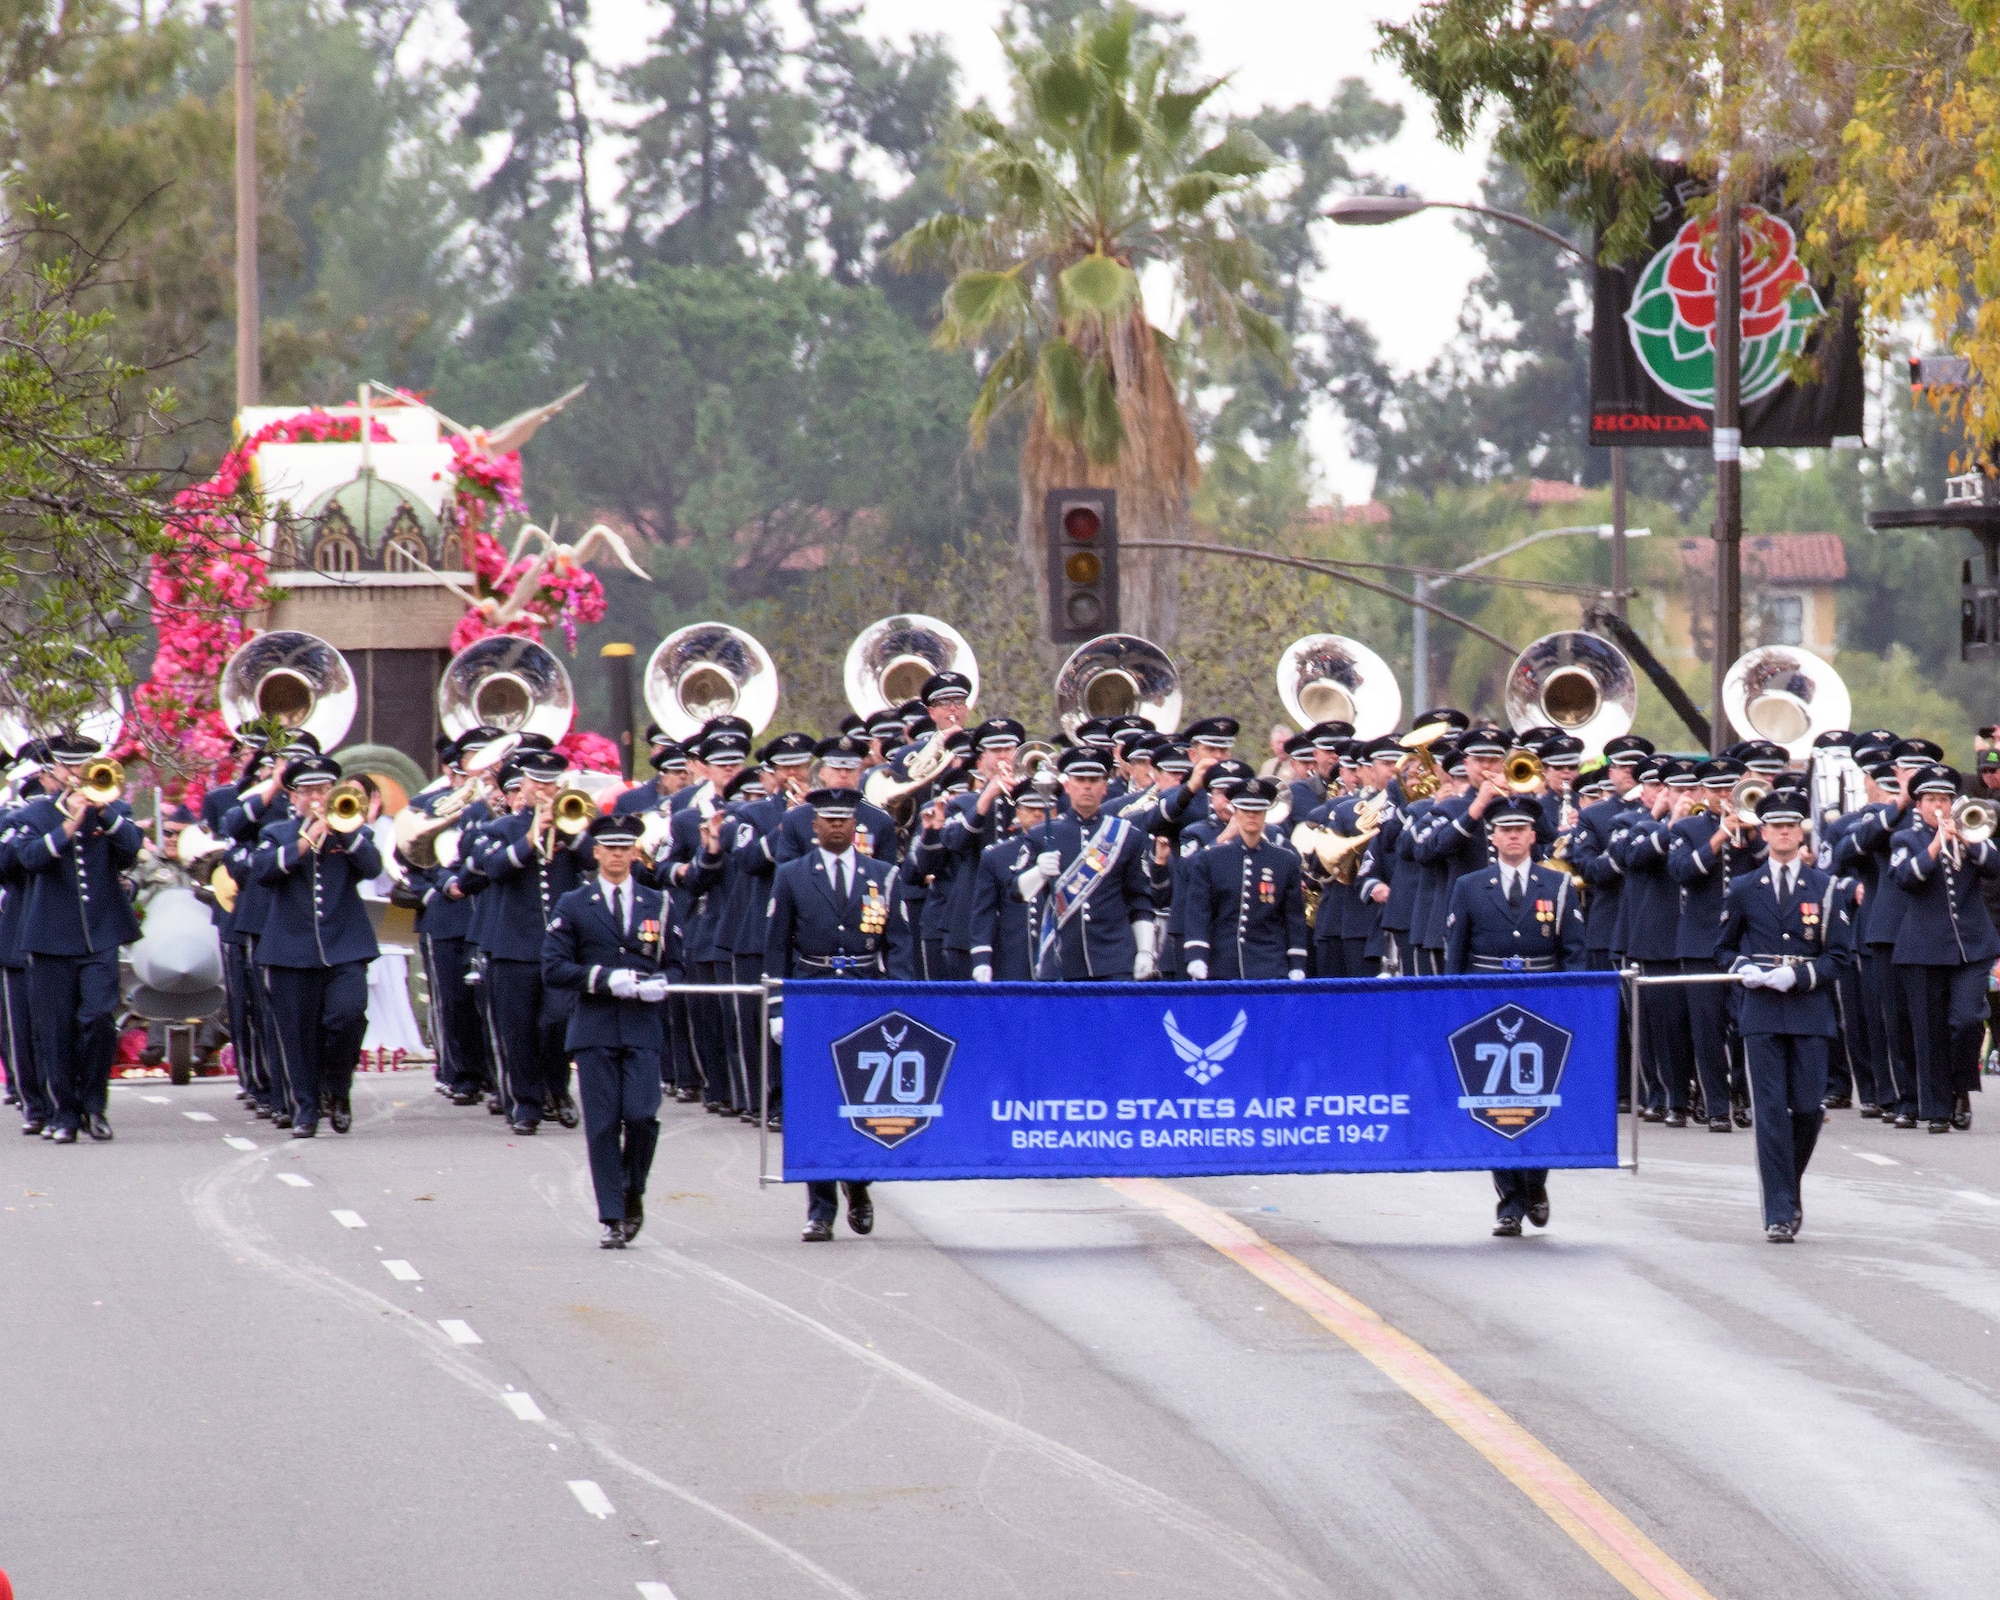 The United States Air Force Total Force Band performs in the 128th Rose Parade in Pasadena, Calif., Jan. 2, 2017. The band kicked off the Air Force’s 70th birthday celebration playing several venues in Southern California, culminating with their appearance in the Rose Parade. (U.S. Air Force photo/Louis Briscese)